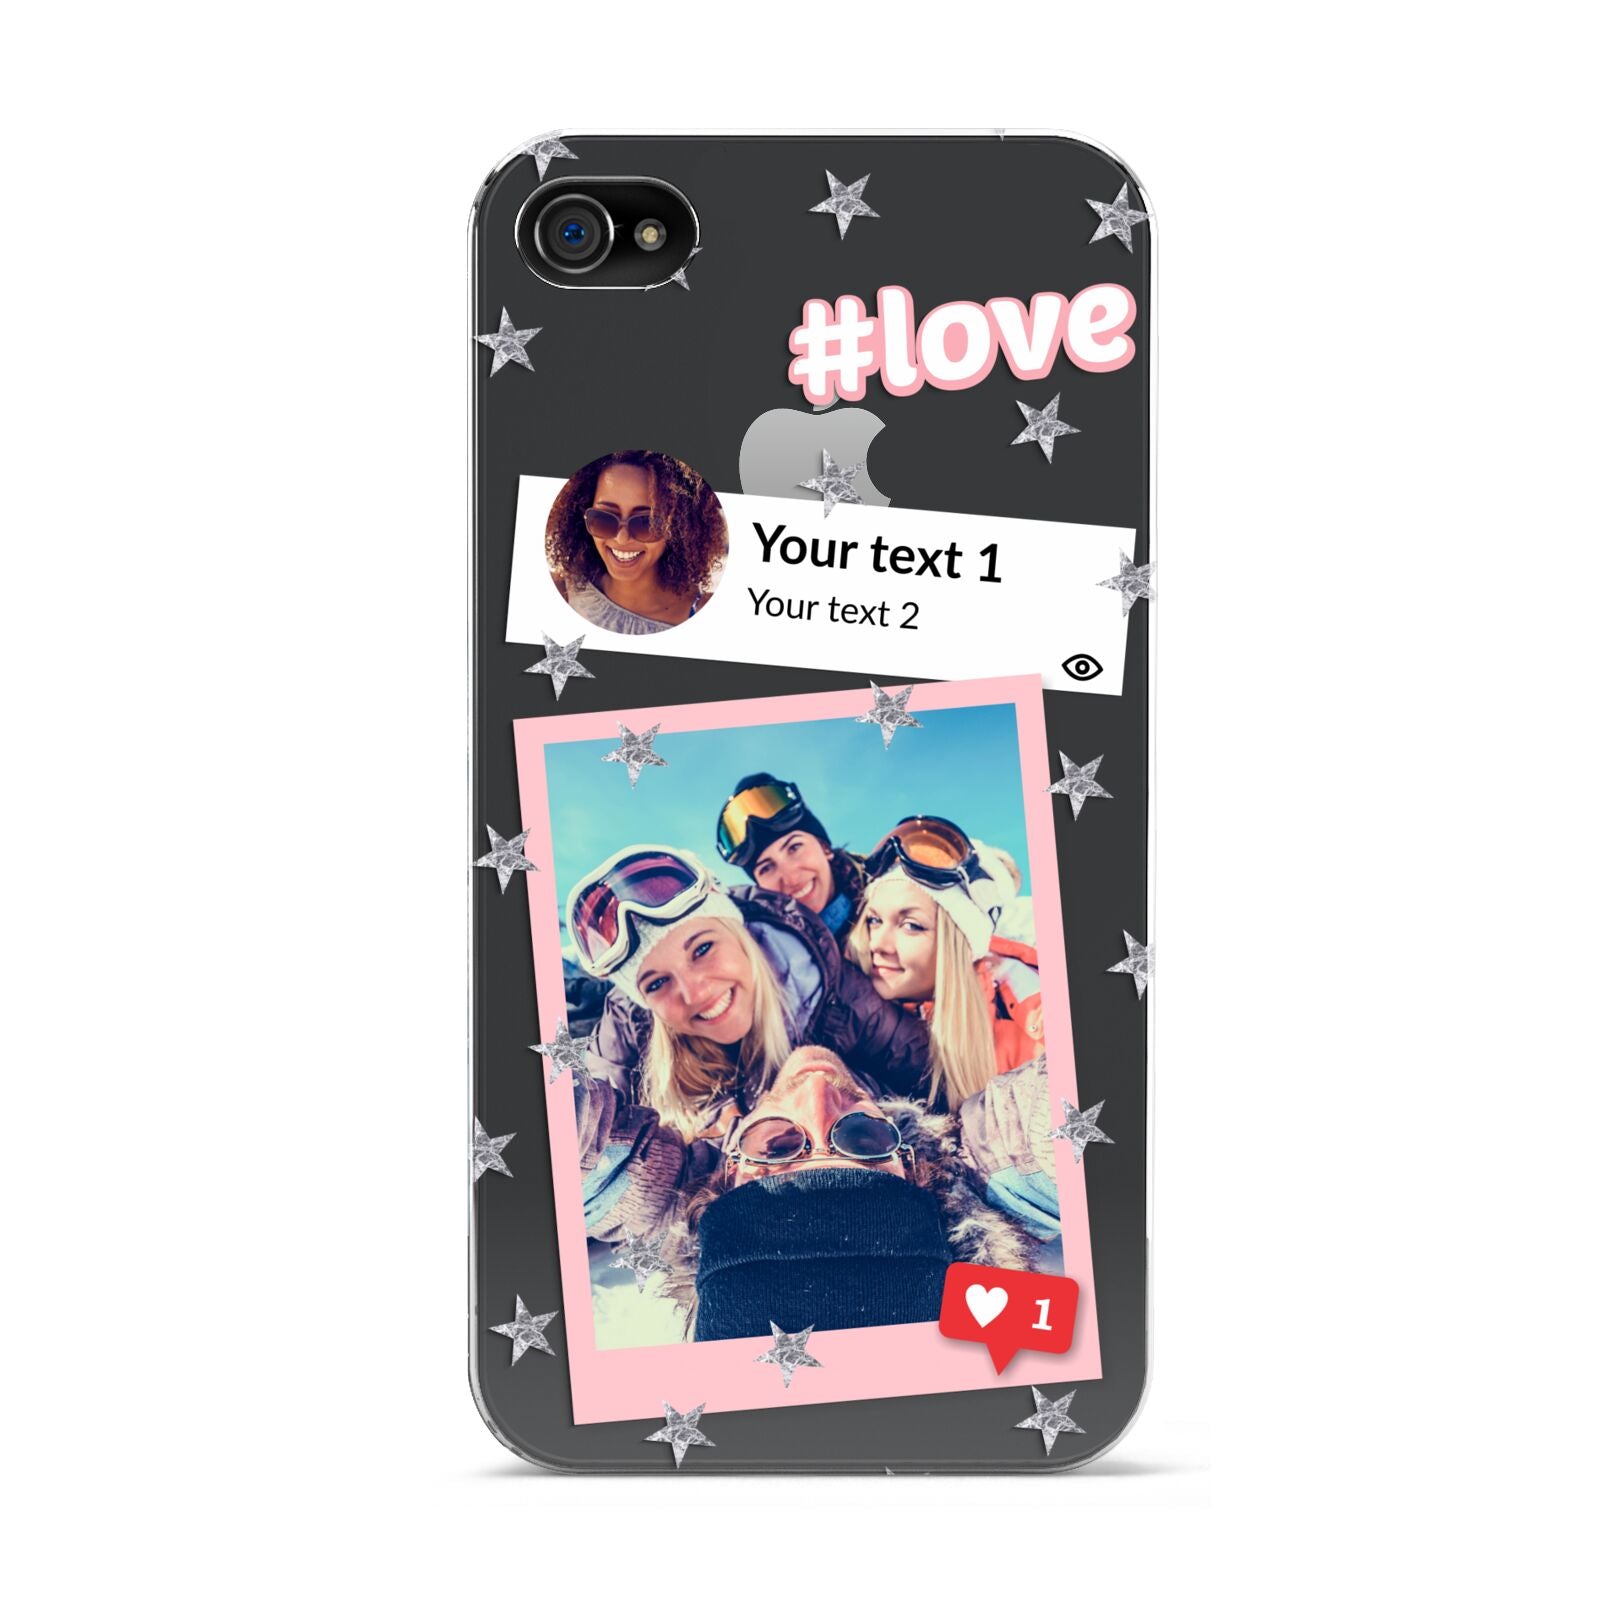 Starry Social Media Photo Montage Upload with Text Apple iPhone 4s Case